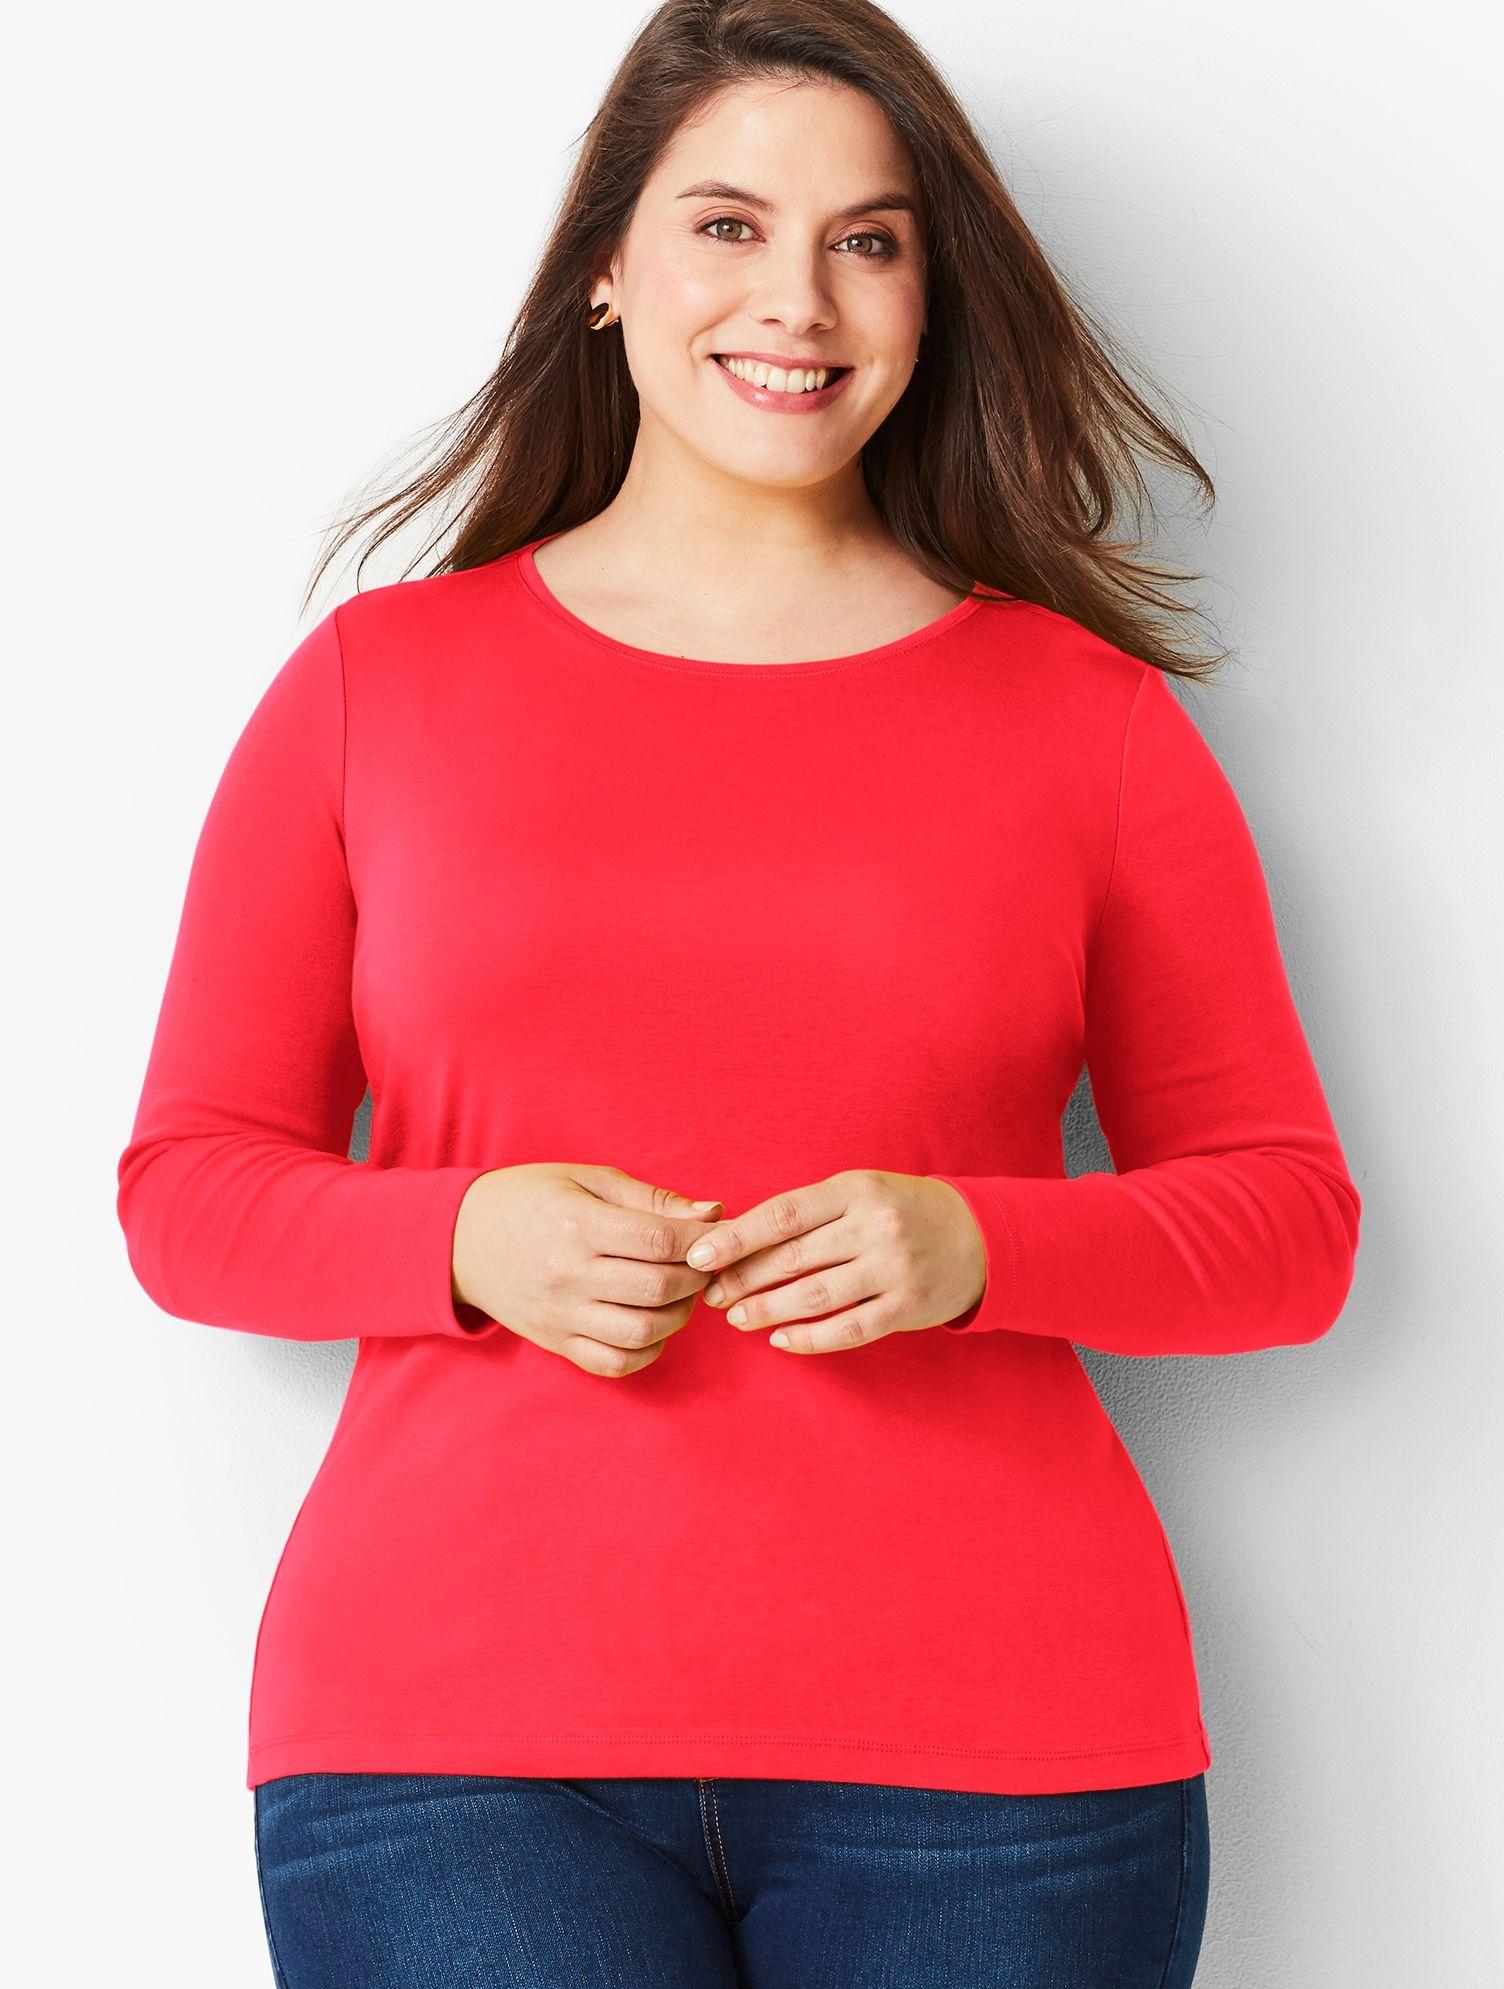 Lyst - Talbots Long-sleeve Crewneck Tee-solid in Red - Save 62%